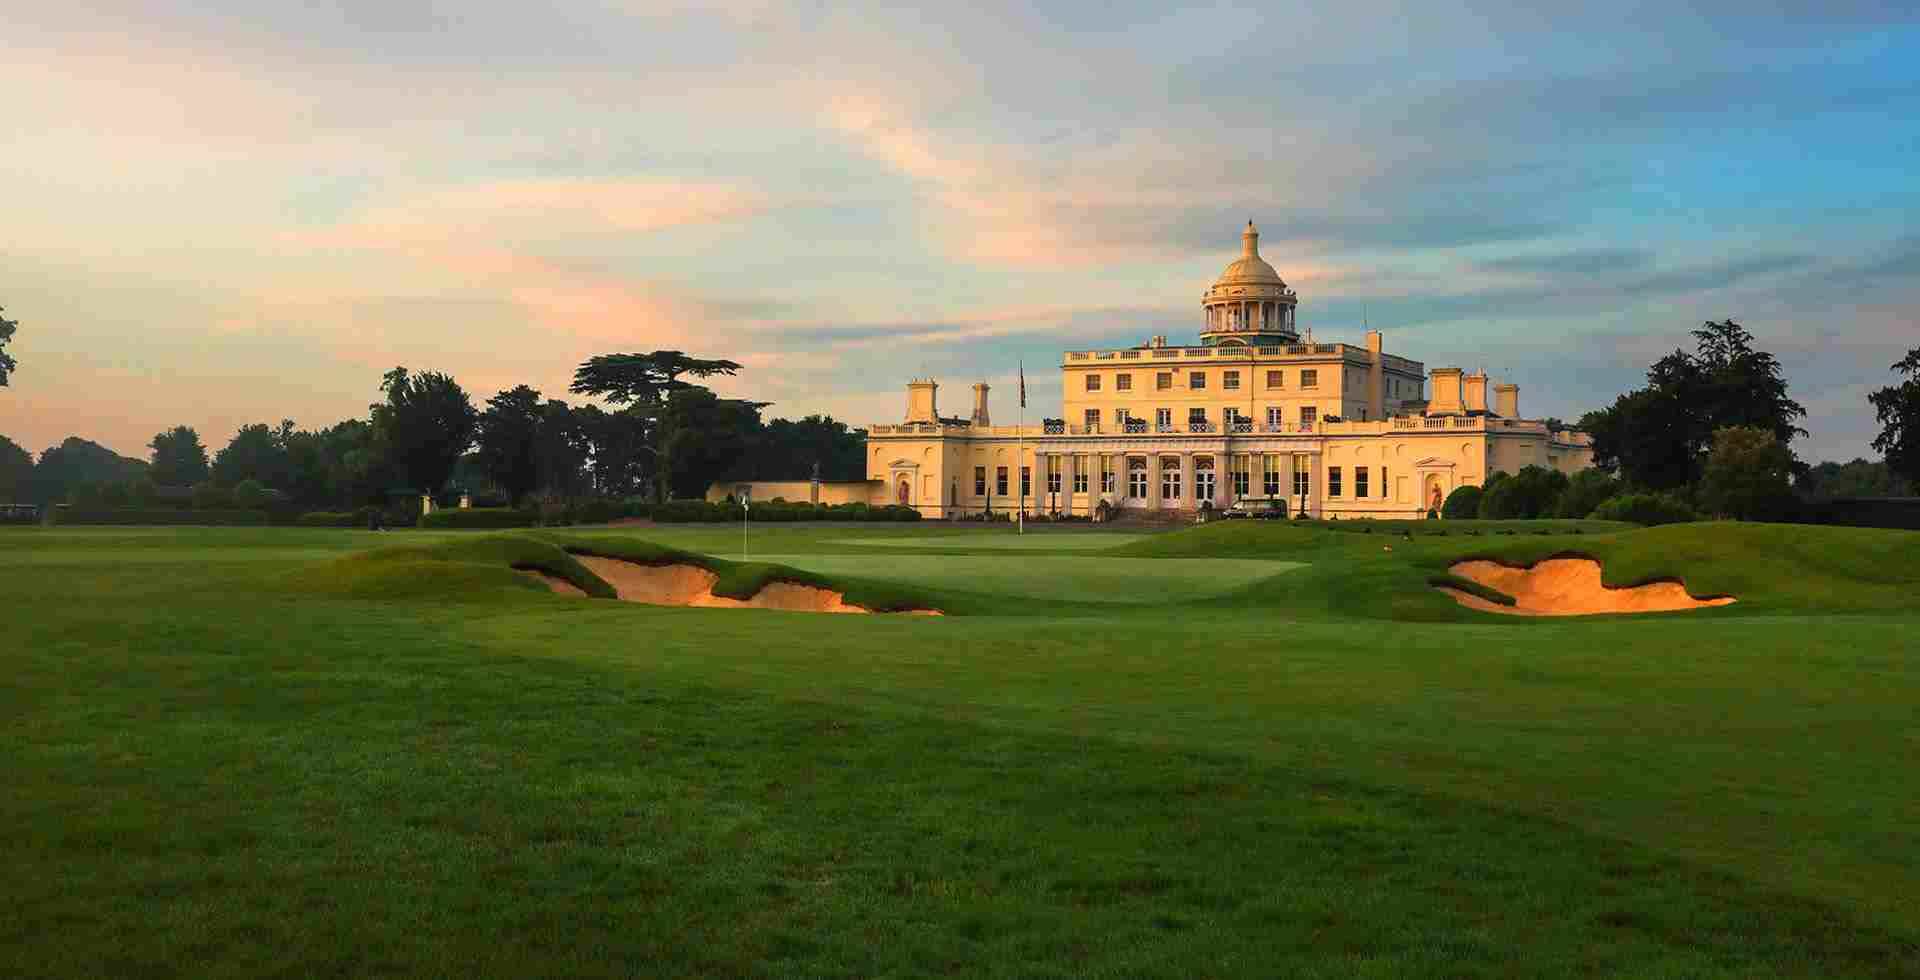 Stoke Park Review: A Celeb-Worthy Retreat With an A List Reputation